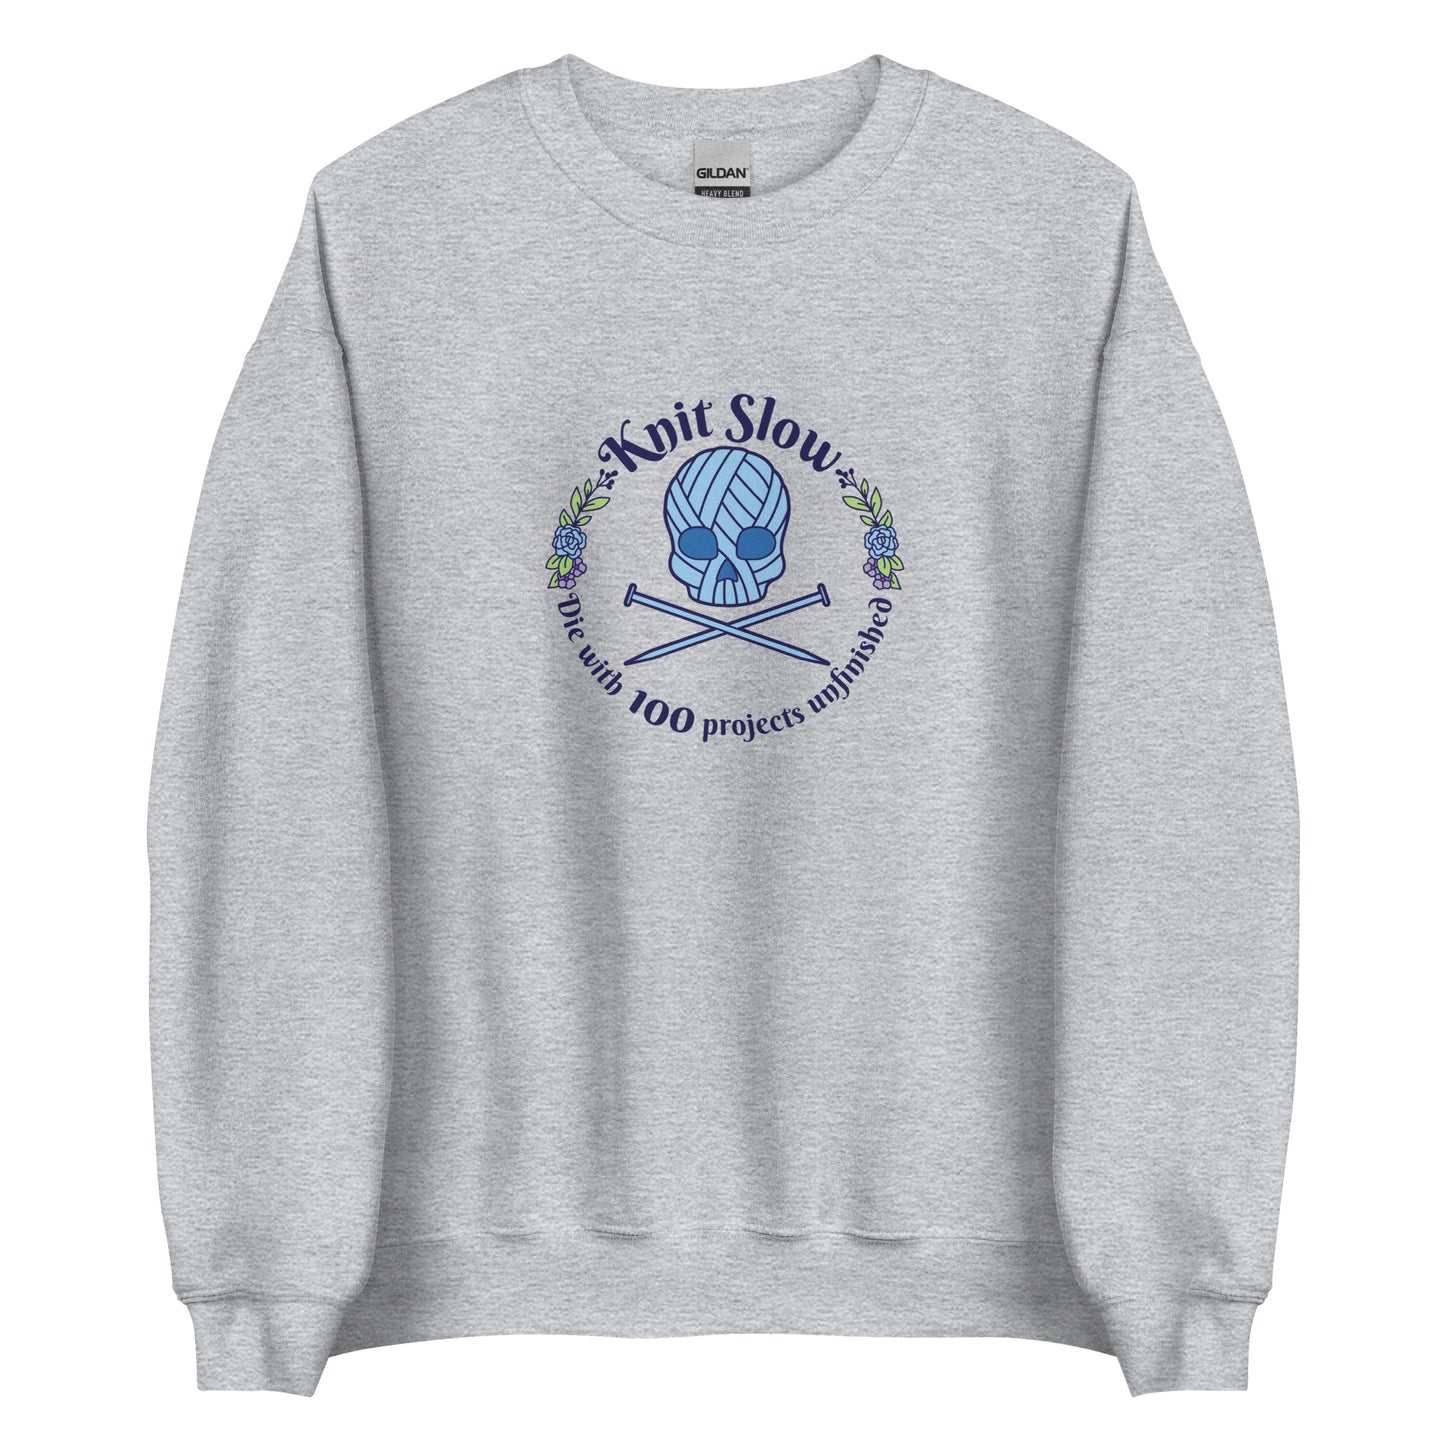 A grey crewneck sweatshirt featuring an image of a skull and crossbones made of yarn and knitting needles. A floral wreath surrounds the skull, along with words that read "Knit Slow, Die with 100 projects unfinished"